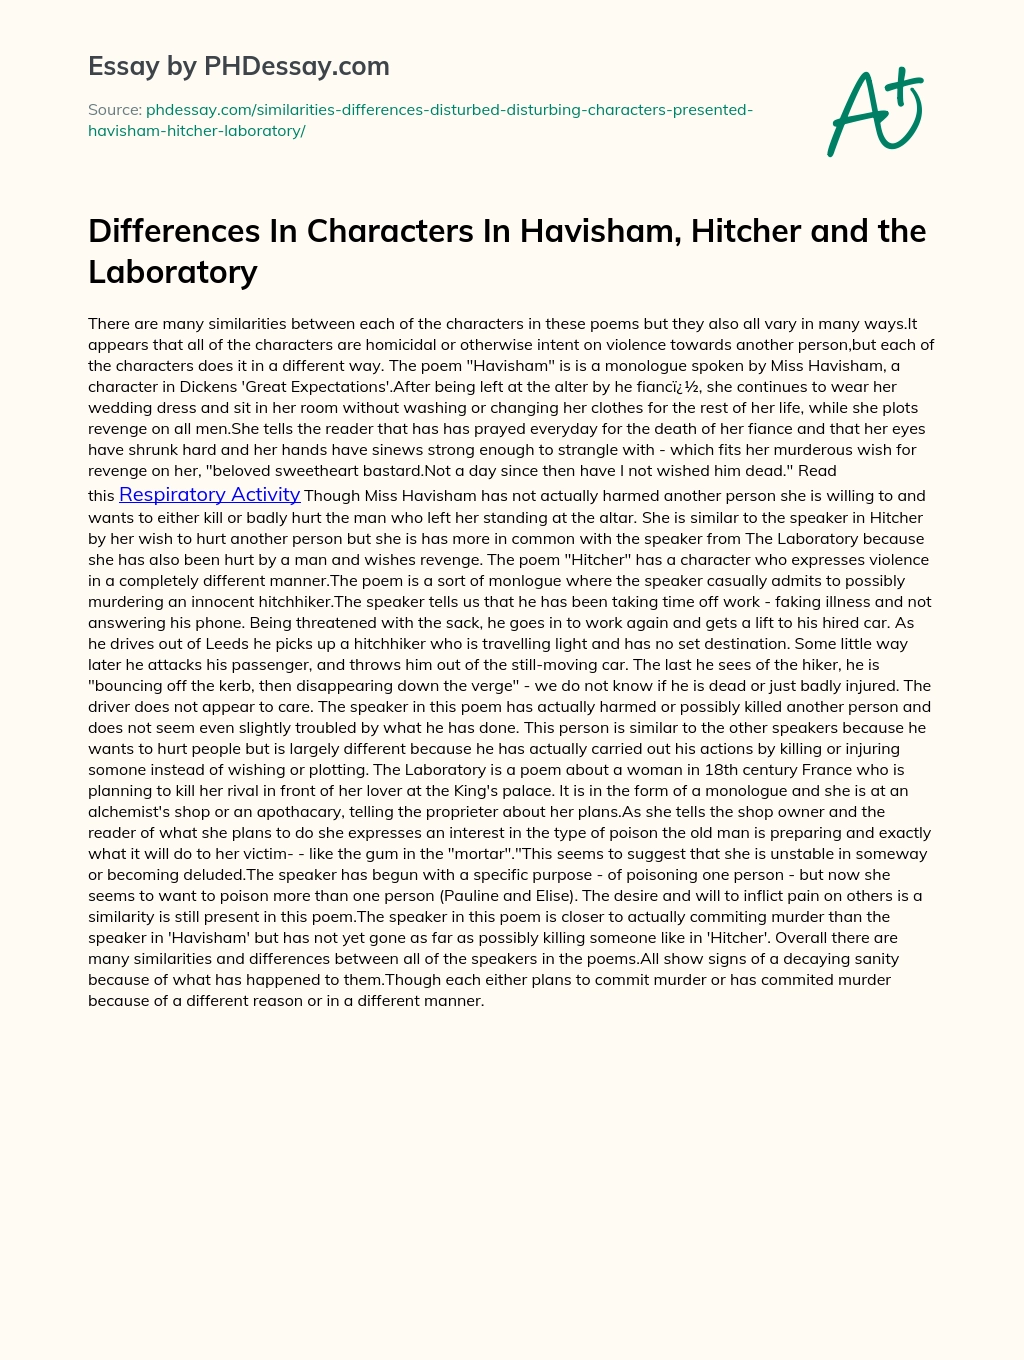 Differences In Characters In Havisham, Hitcher and the Laboratory essay